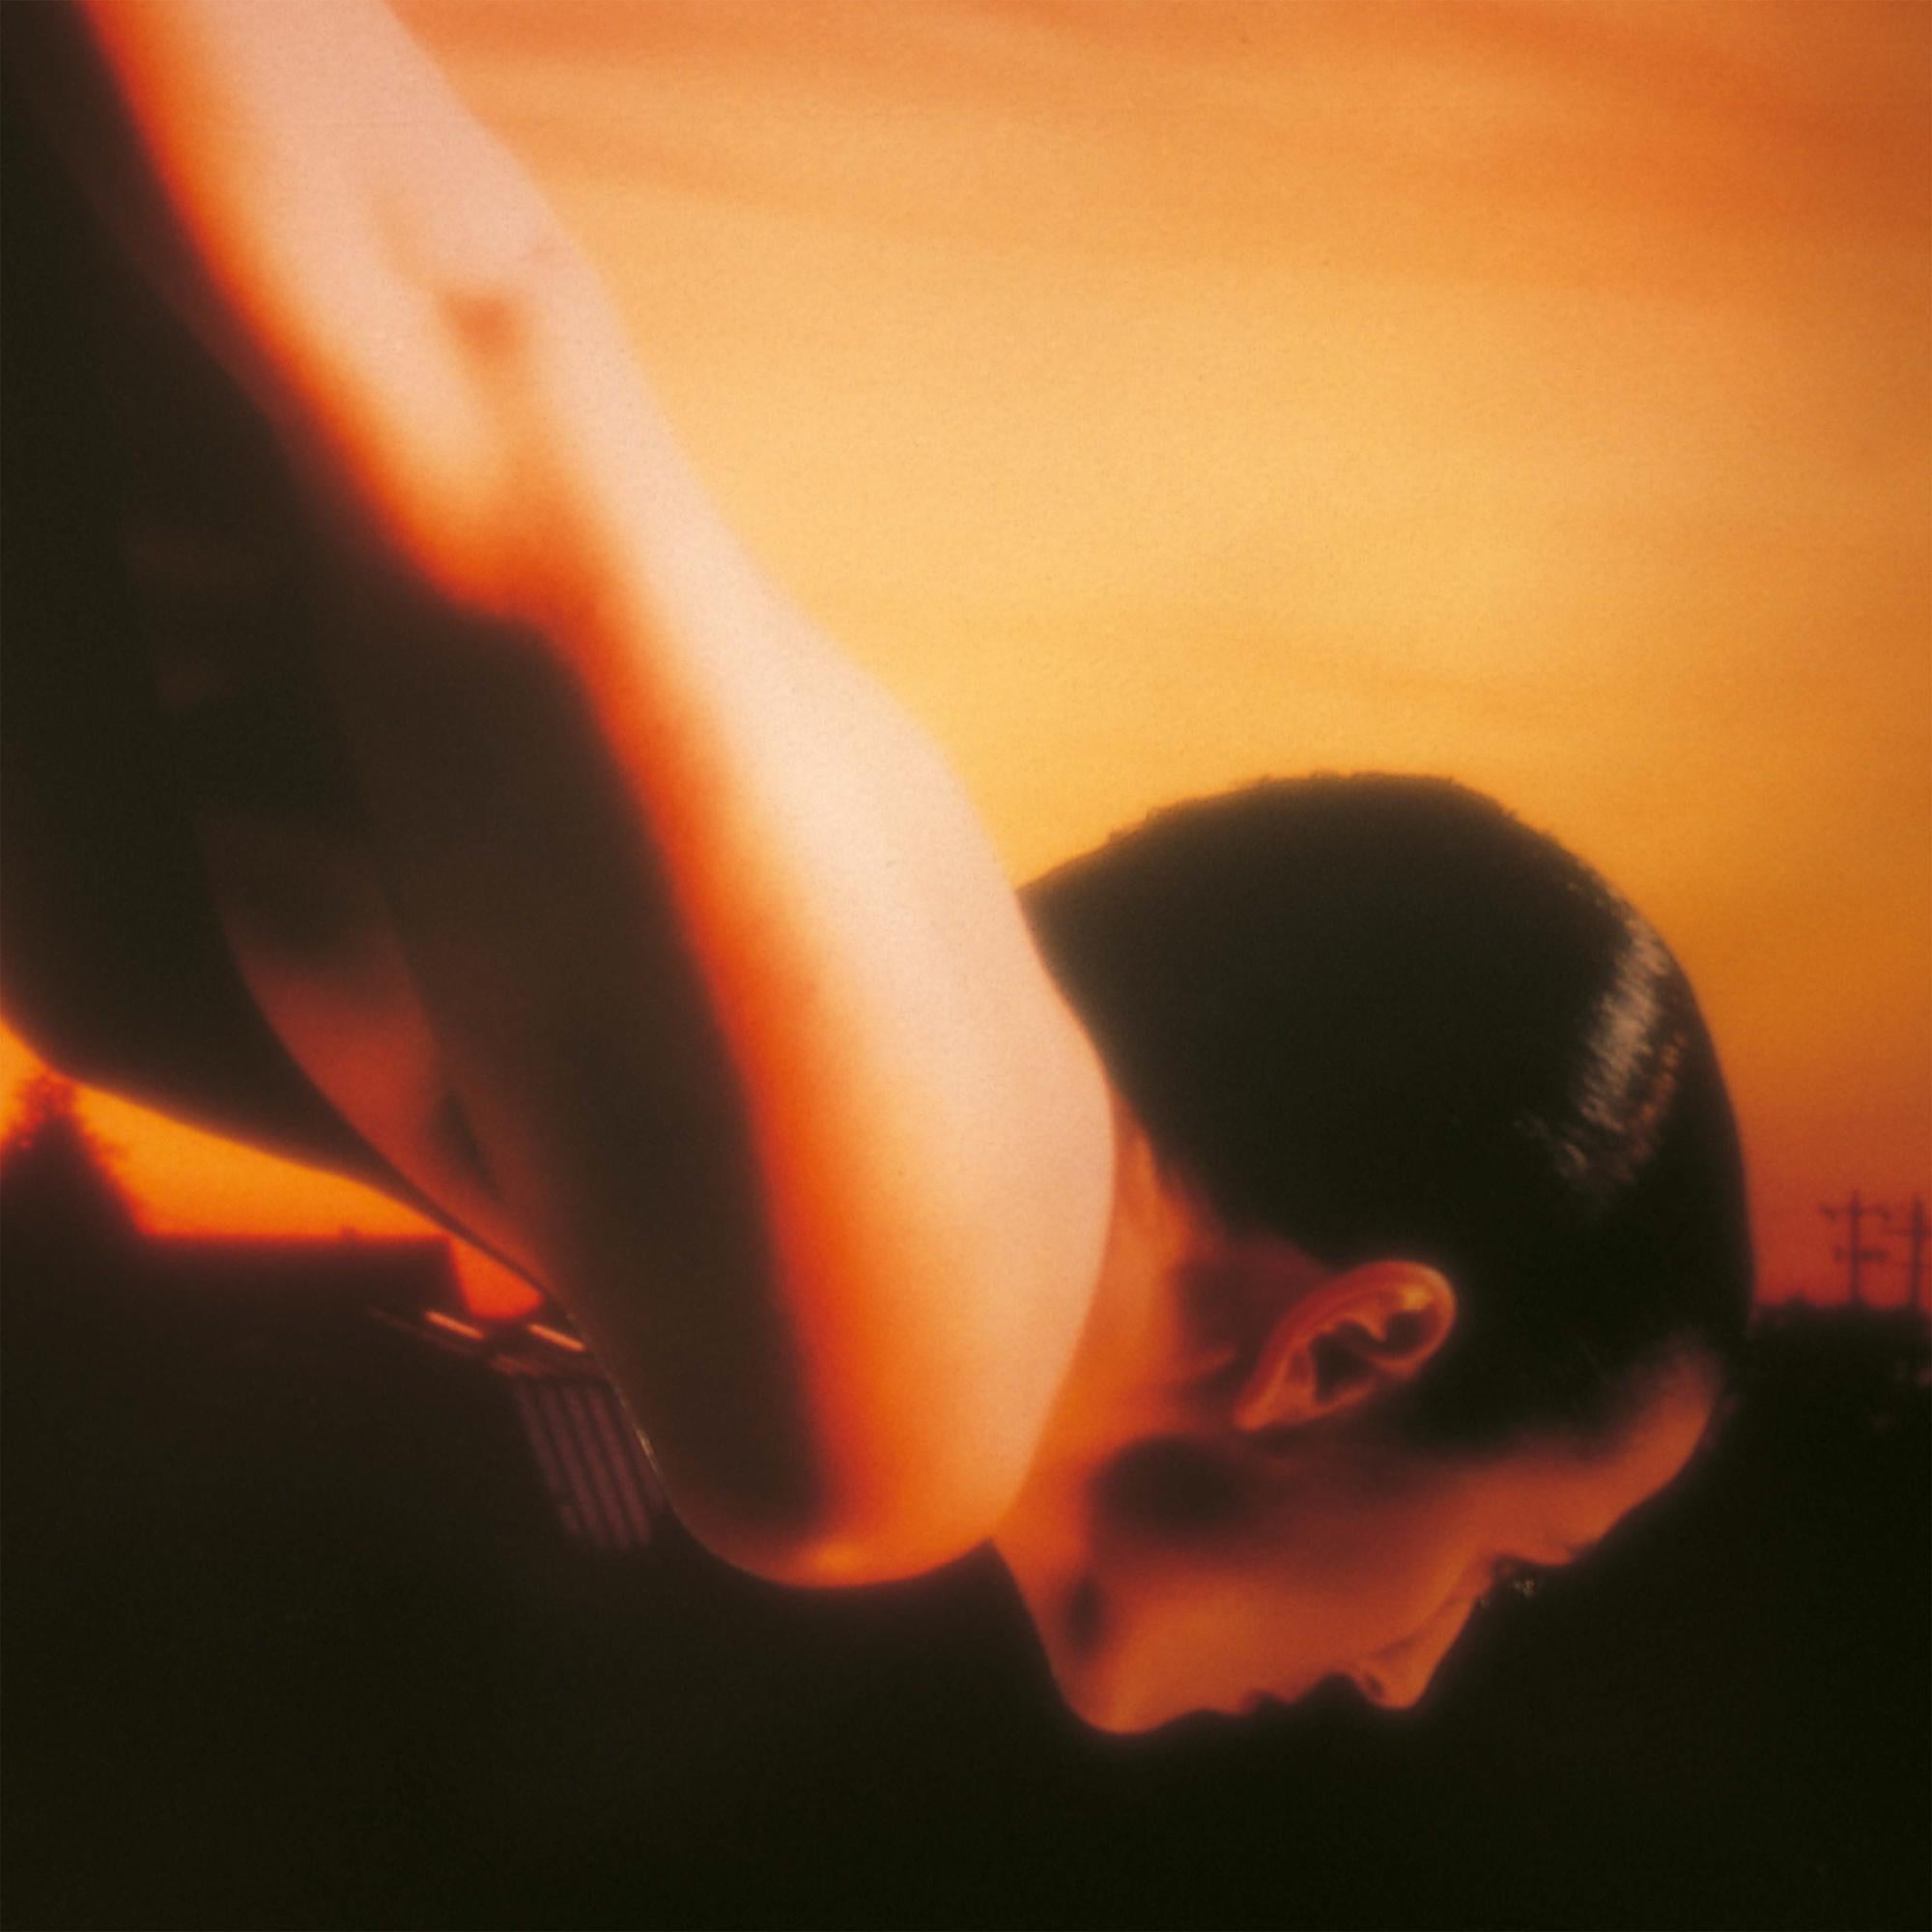 PORCUPINE TREE 'ON THE SUNDAY OF LIFE' 2LP